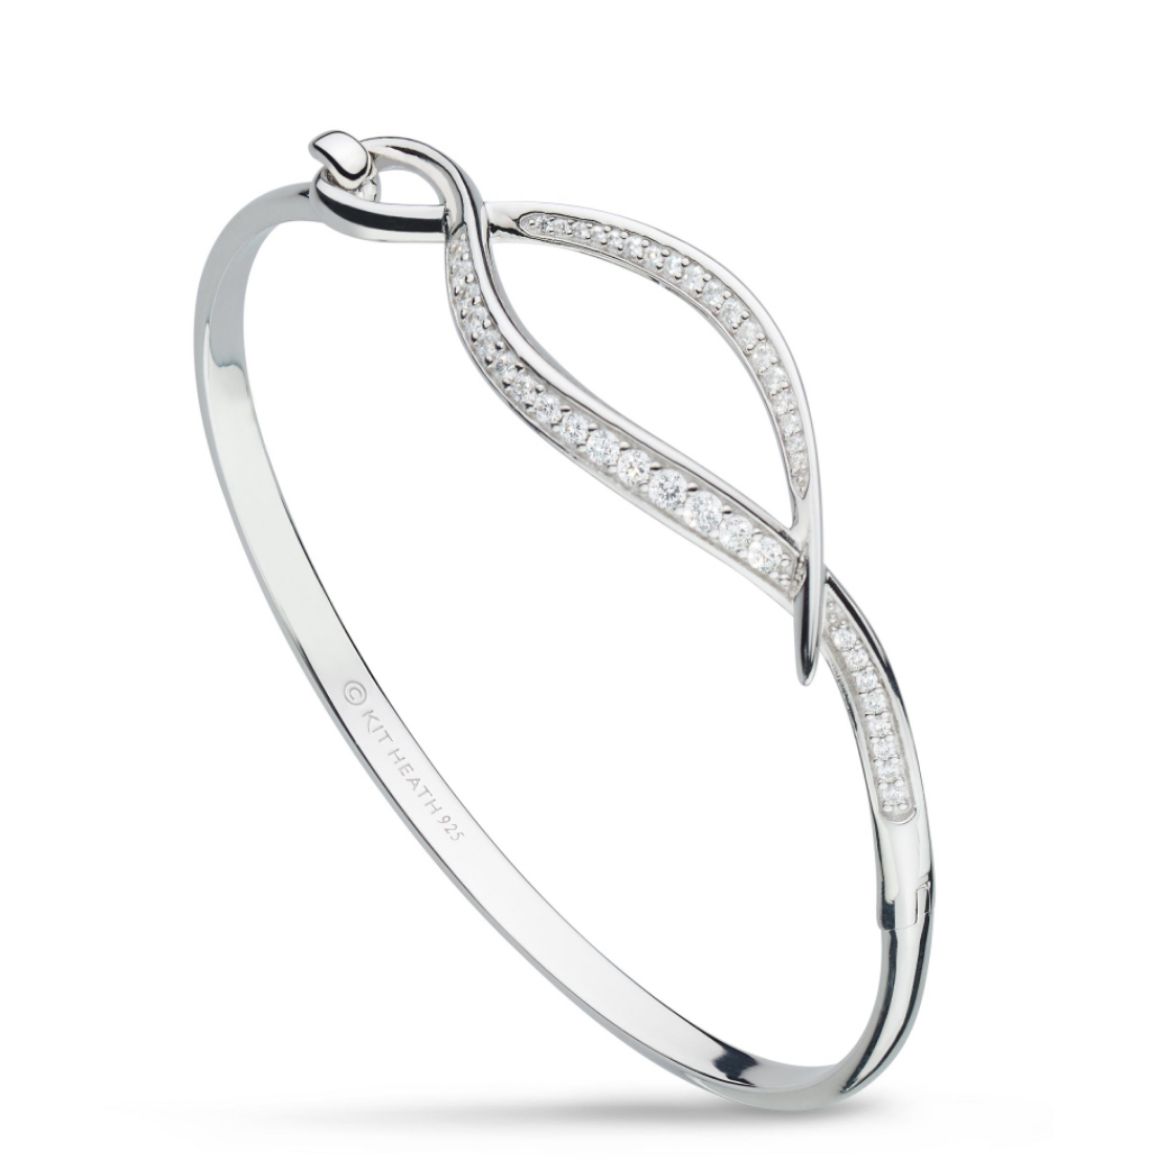 Picture of Entwine Twine Twist Pavé Hinged Bangle